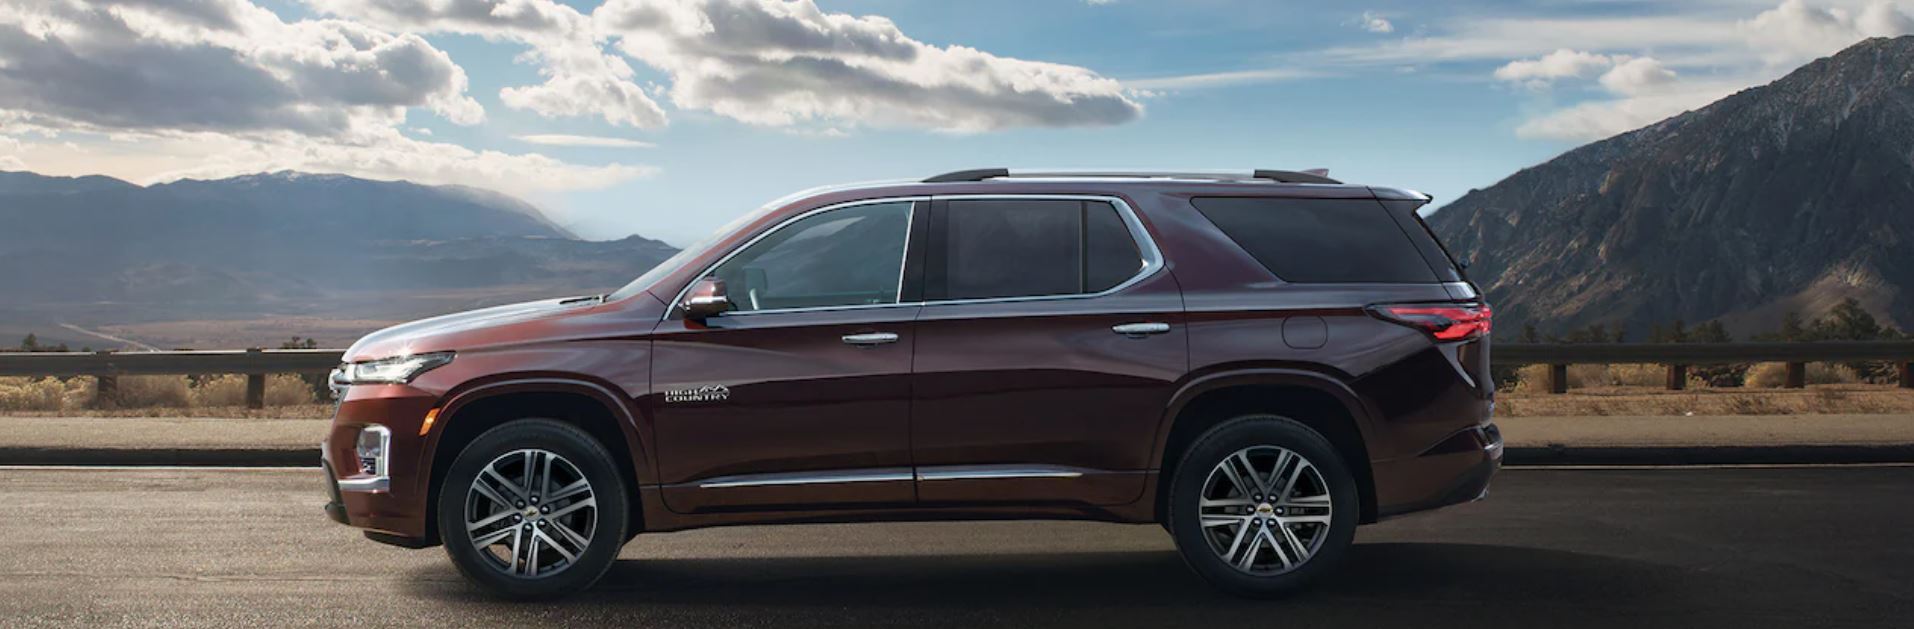 Used Chevrolet Traverse for Sale near Pittsburgh, PA